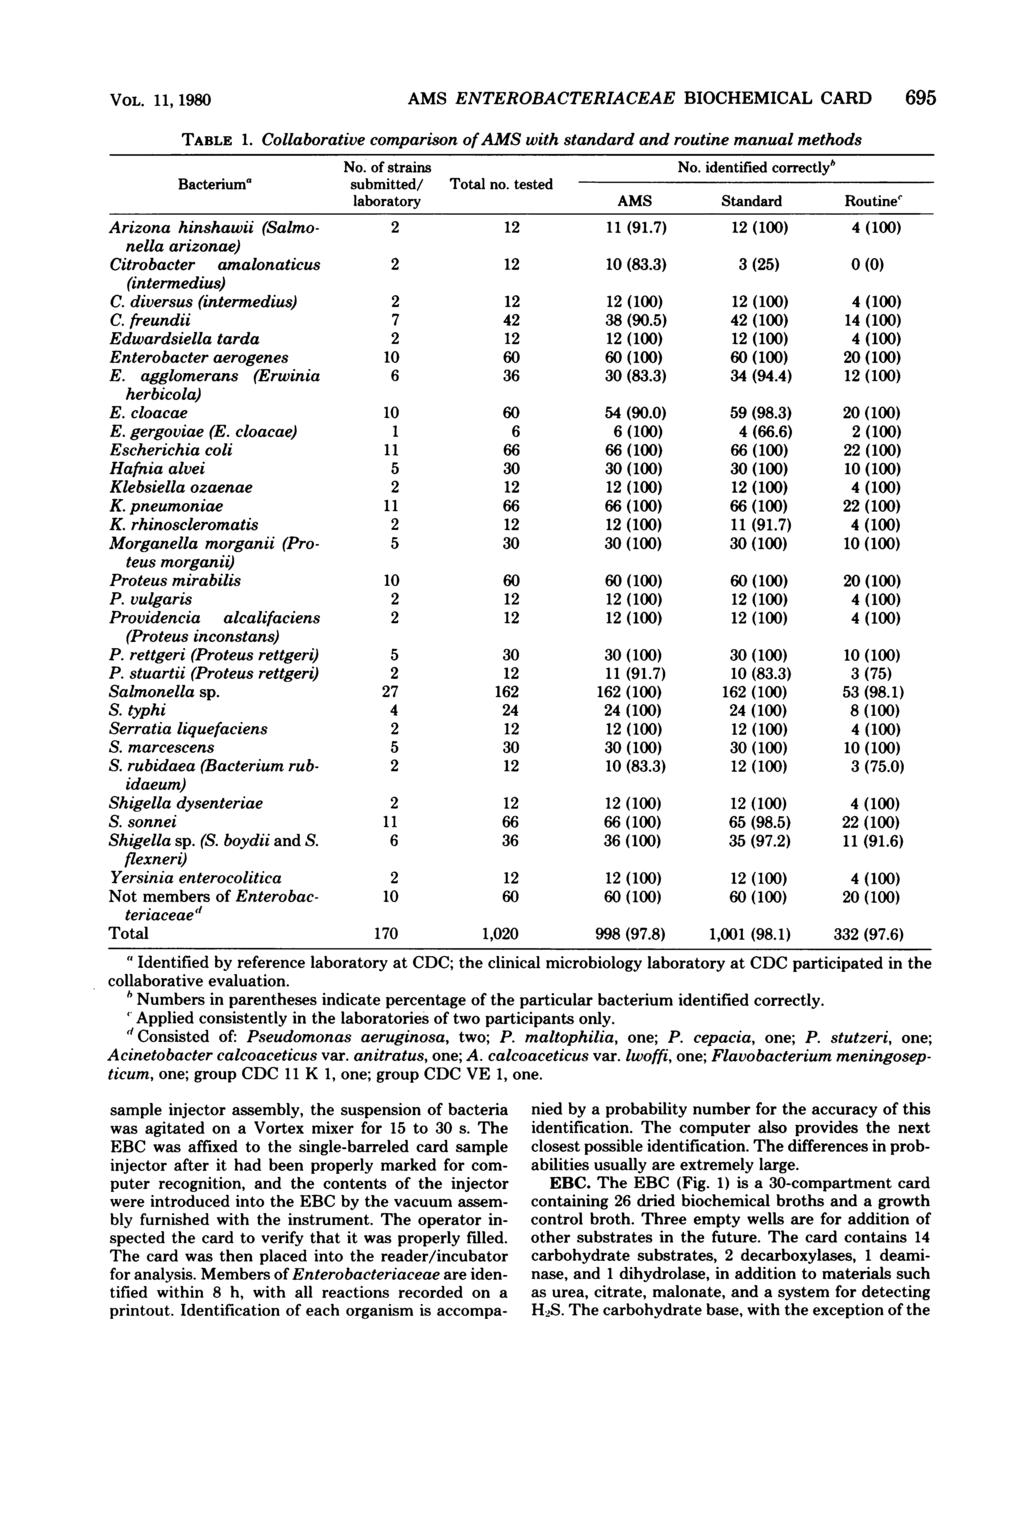 VOL. 11, 1980 AMS ENTEROBACTERIACEAE BIOCHEMICAL CARD 695 TABLE 1. Collaborative comparison ofams with standard and routine manual methods Bacterium' No. of strains No.